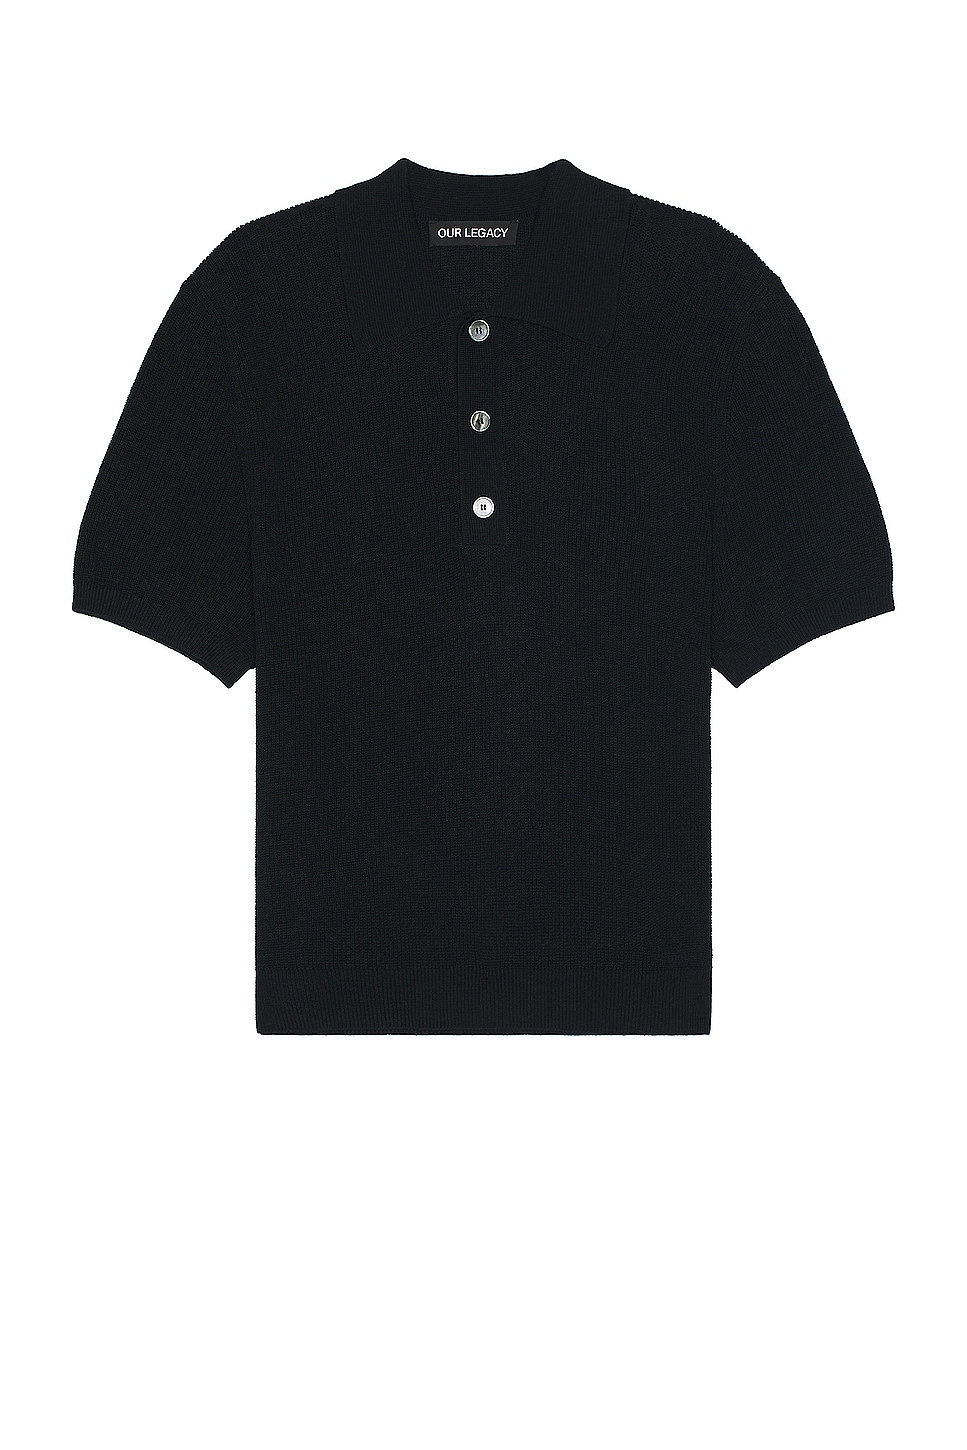 Image 1 of Our Legacy Traditional Polo in Shadow Black Crispy Cotton